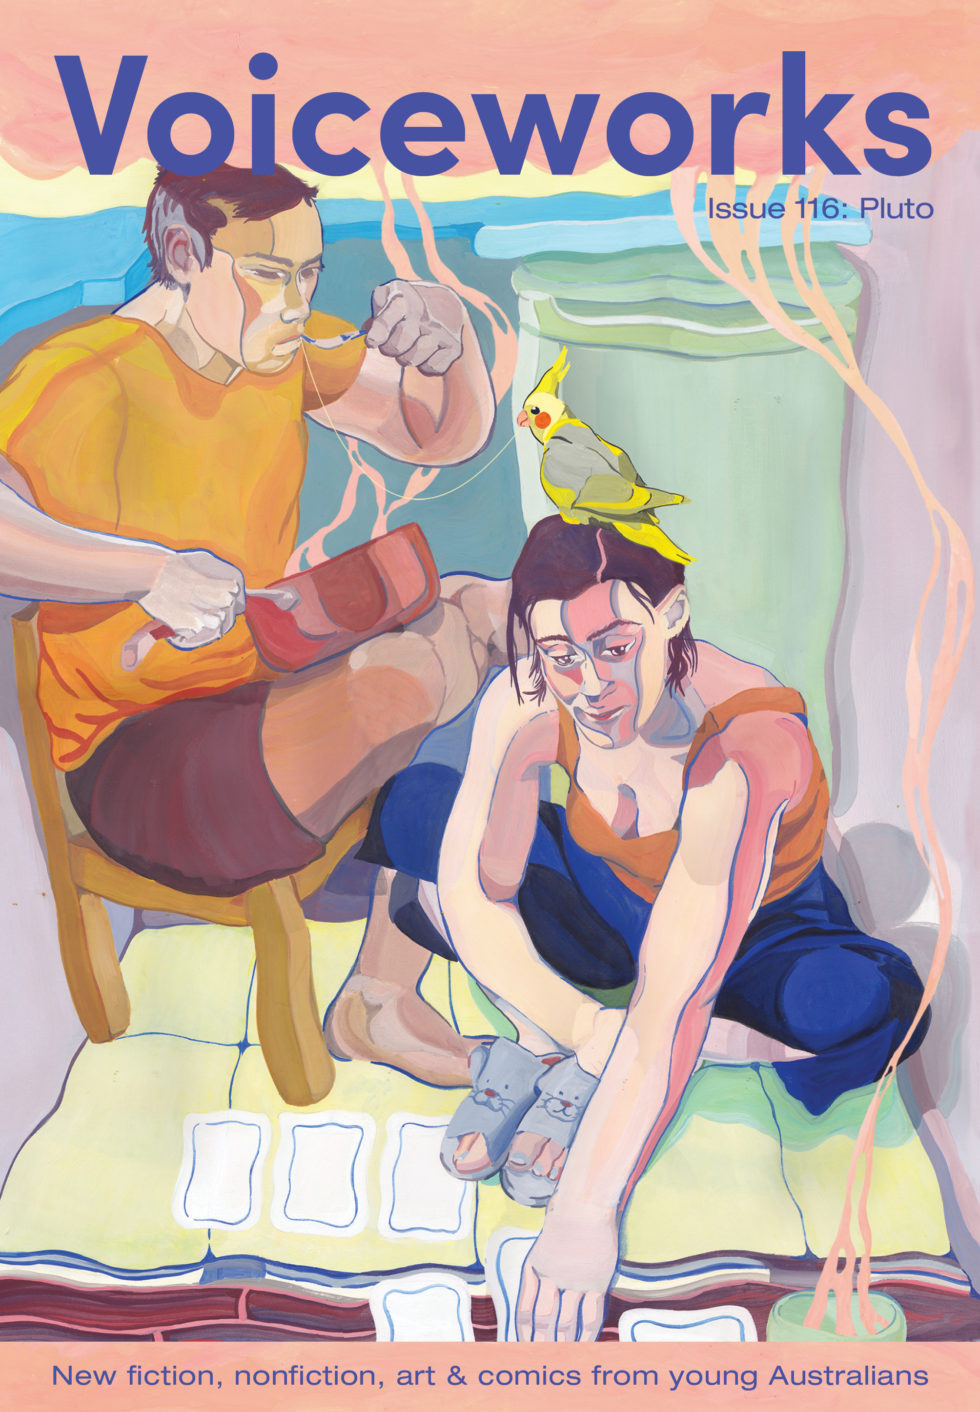 the cover of this issue features two people - one is reading tarot, the other is eating a liquid from a steaming pot. The fumes from a mug rises up and around the characters